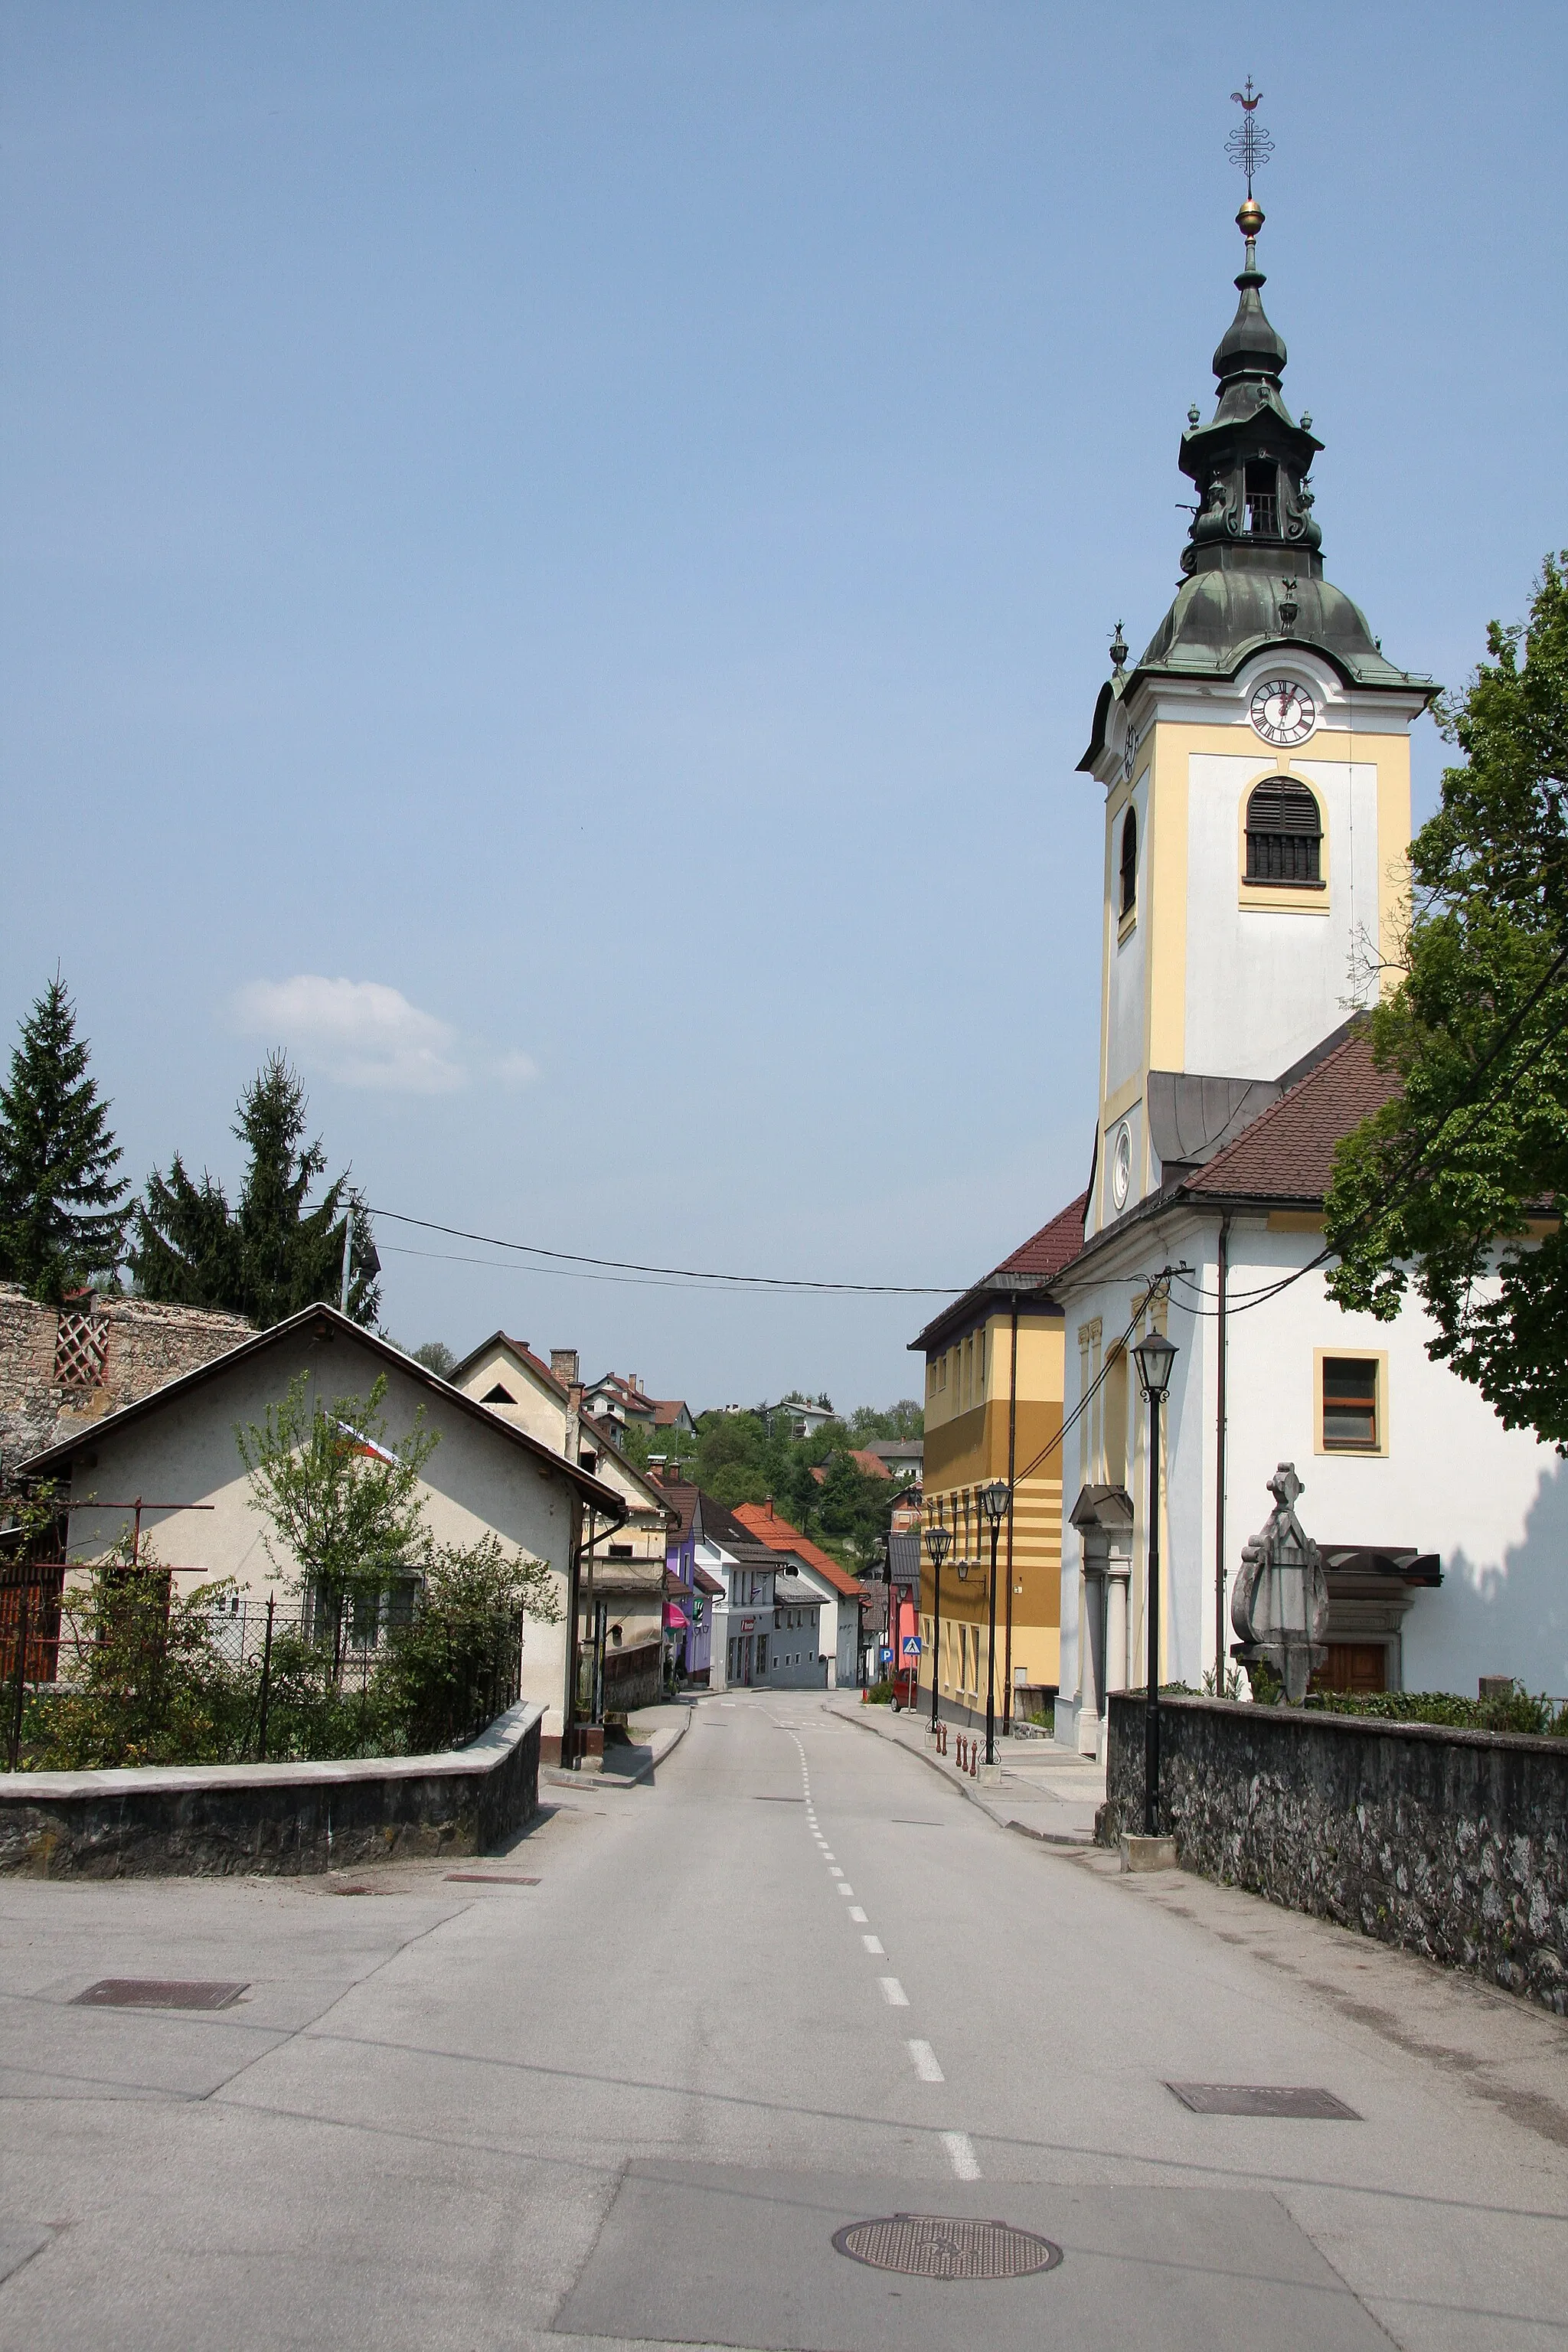 Photo showing: Center of Borovnica, Slovenia. On the right side, the church of St. Marjeta is visible and behind it, the primary school.